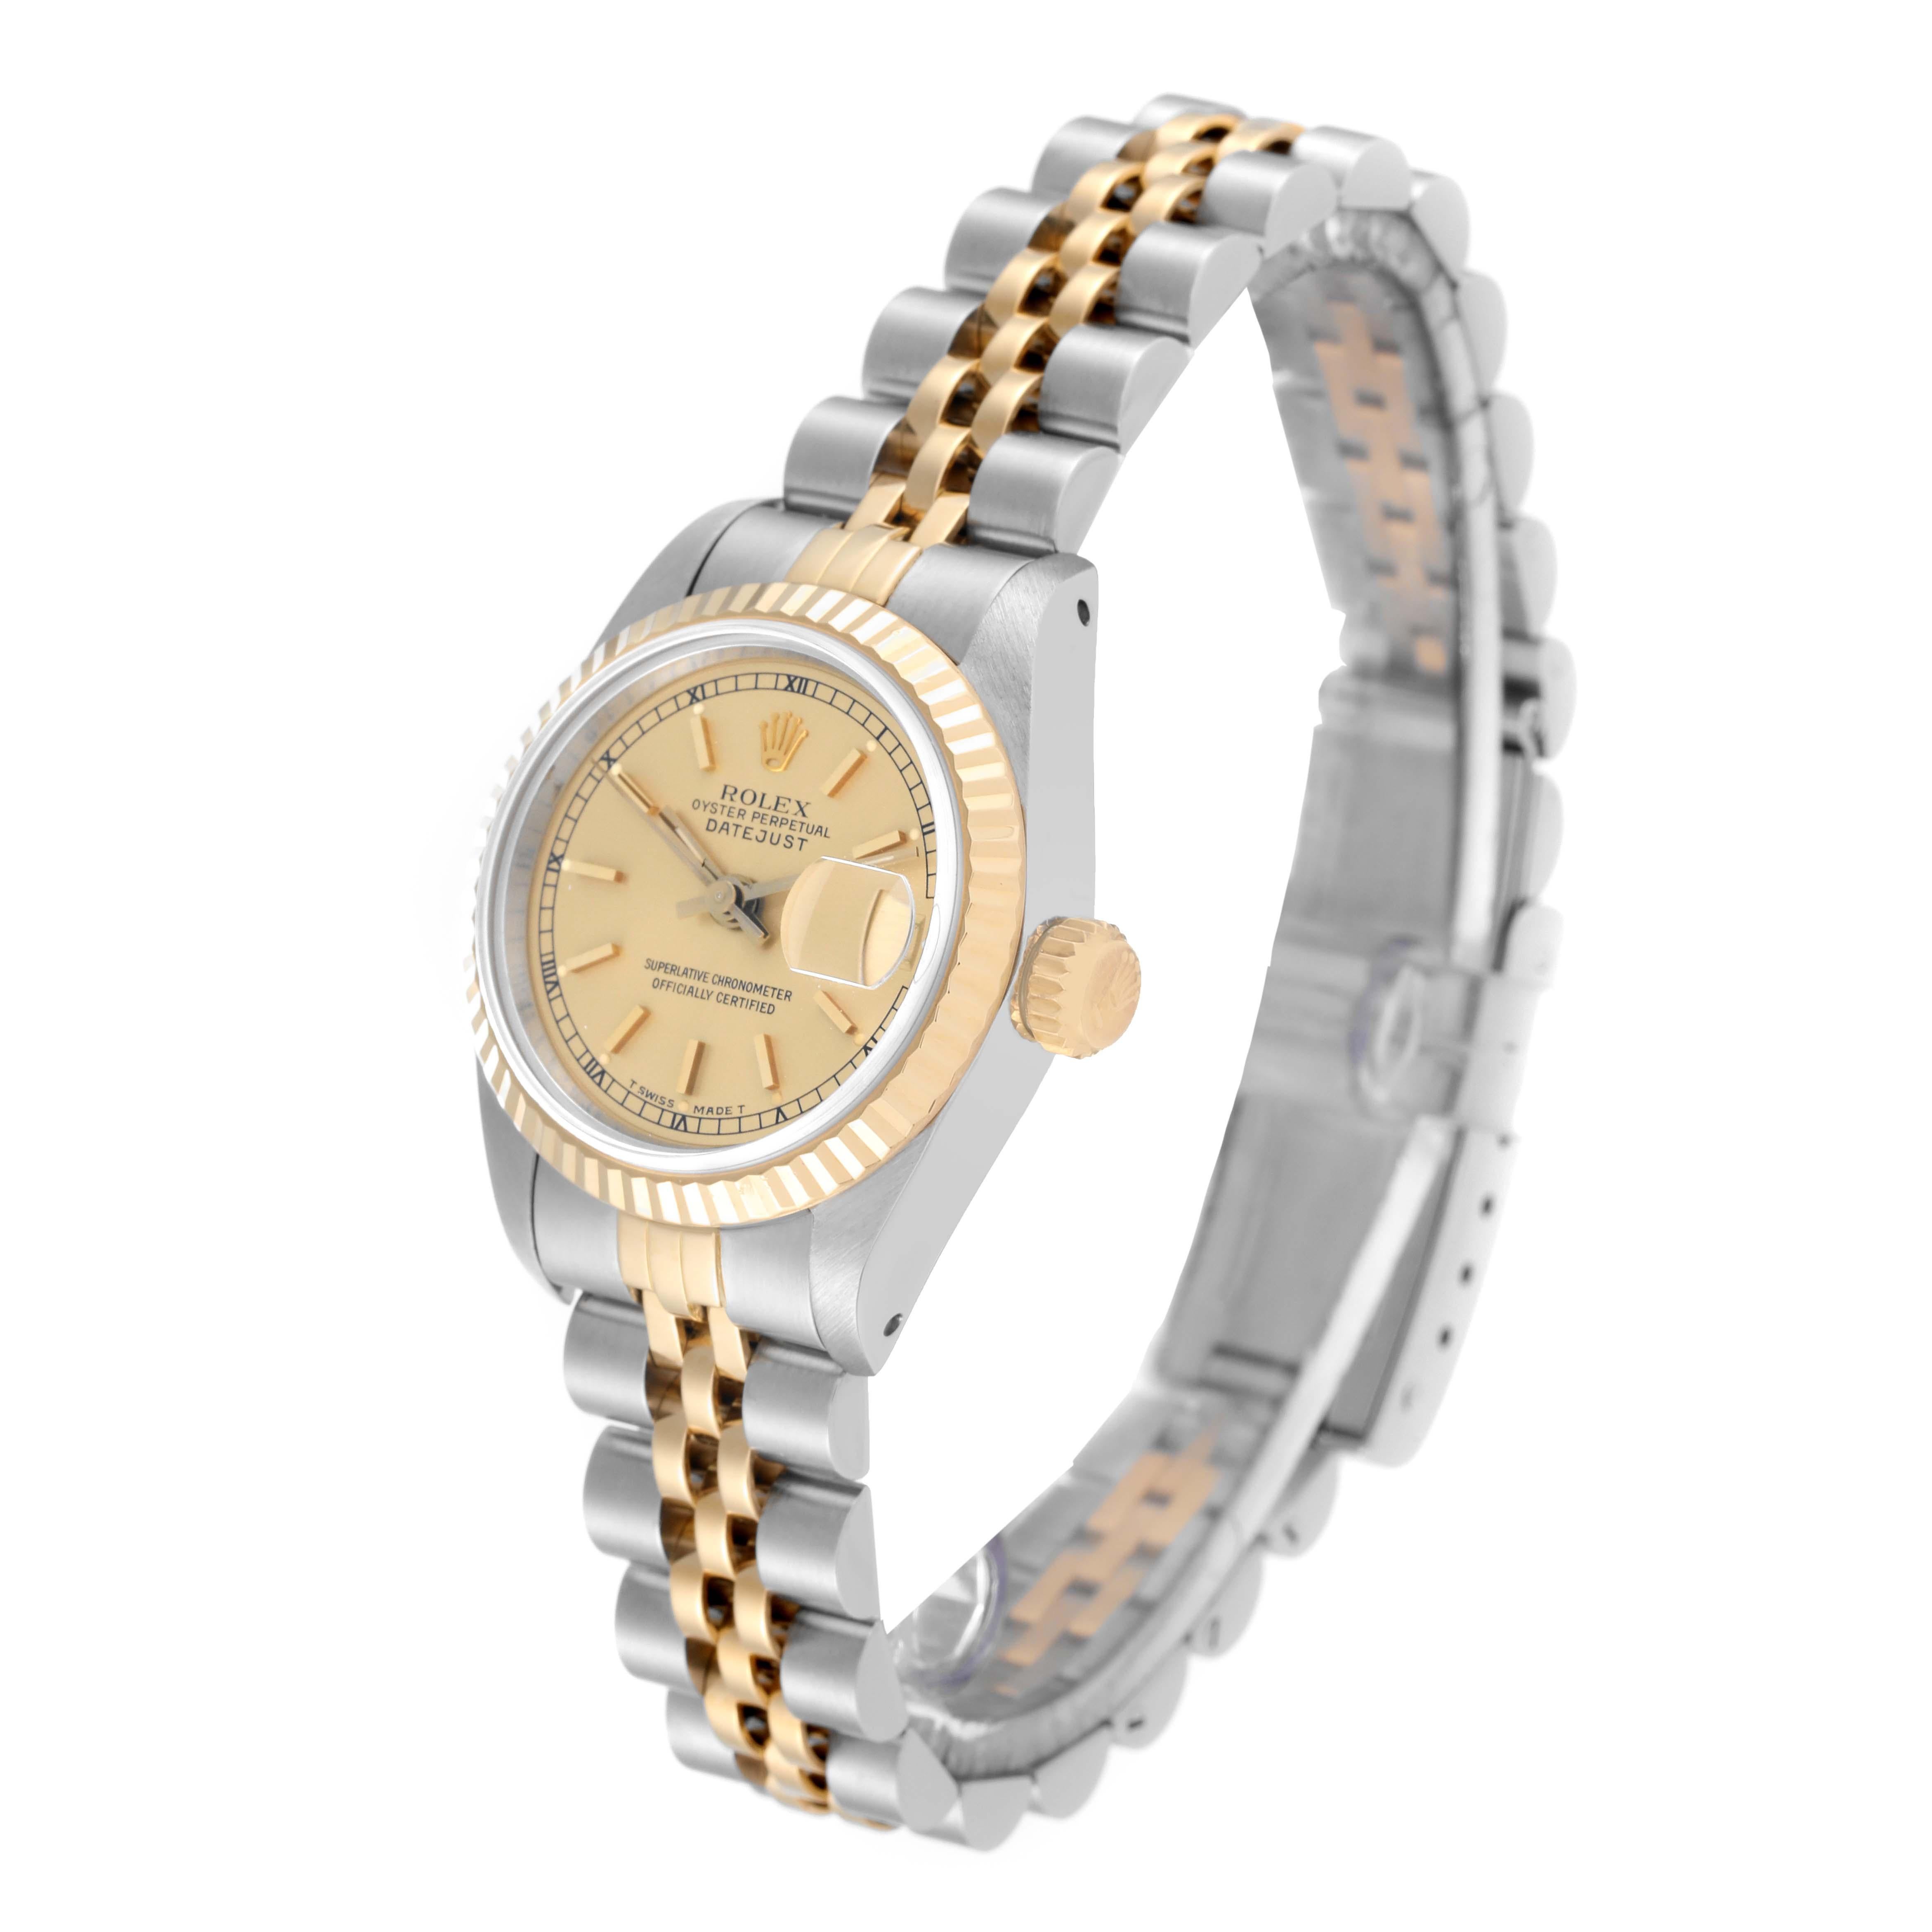 Rolex Datejust Steel Yellow Gold Champagne Dial Ladies Watch 69173 In Excellent Condition For Sale In Atlanta, GA